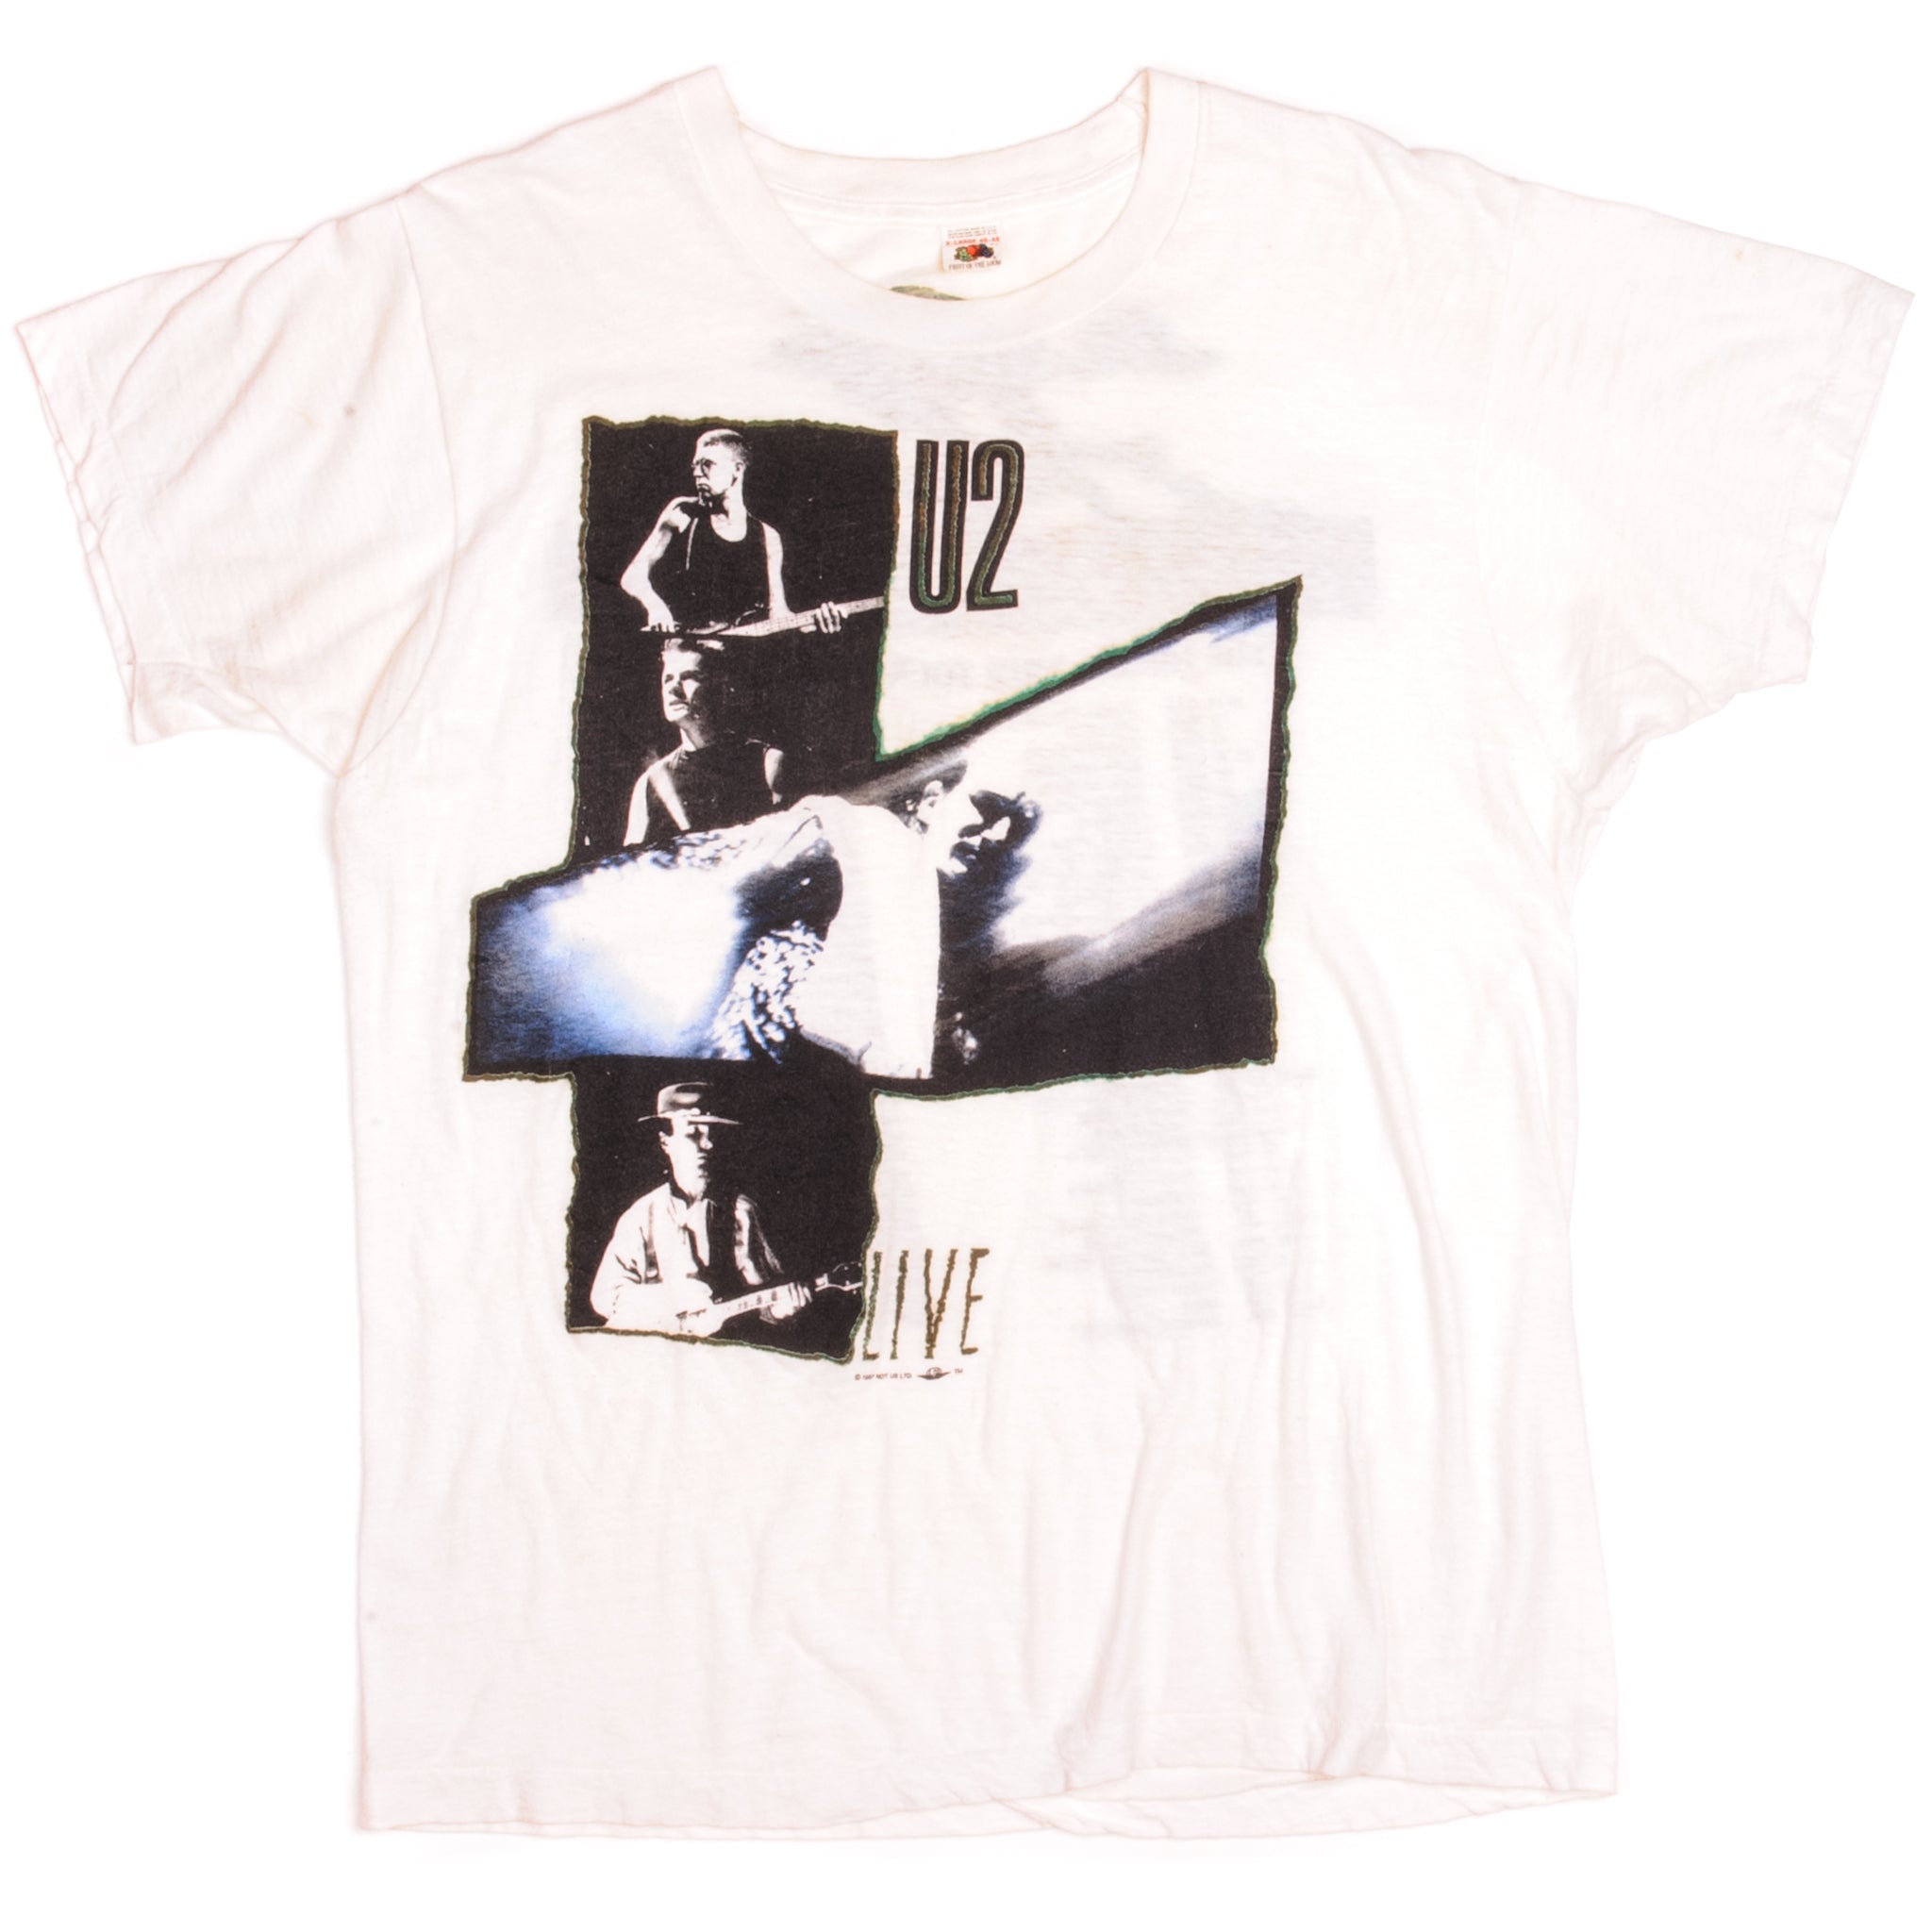 VINTAGE U2 LIVE TEE SHIRT 1987 SIZE LARGE MADE IN USA